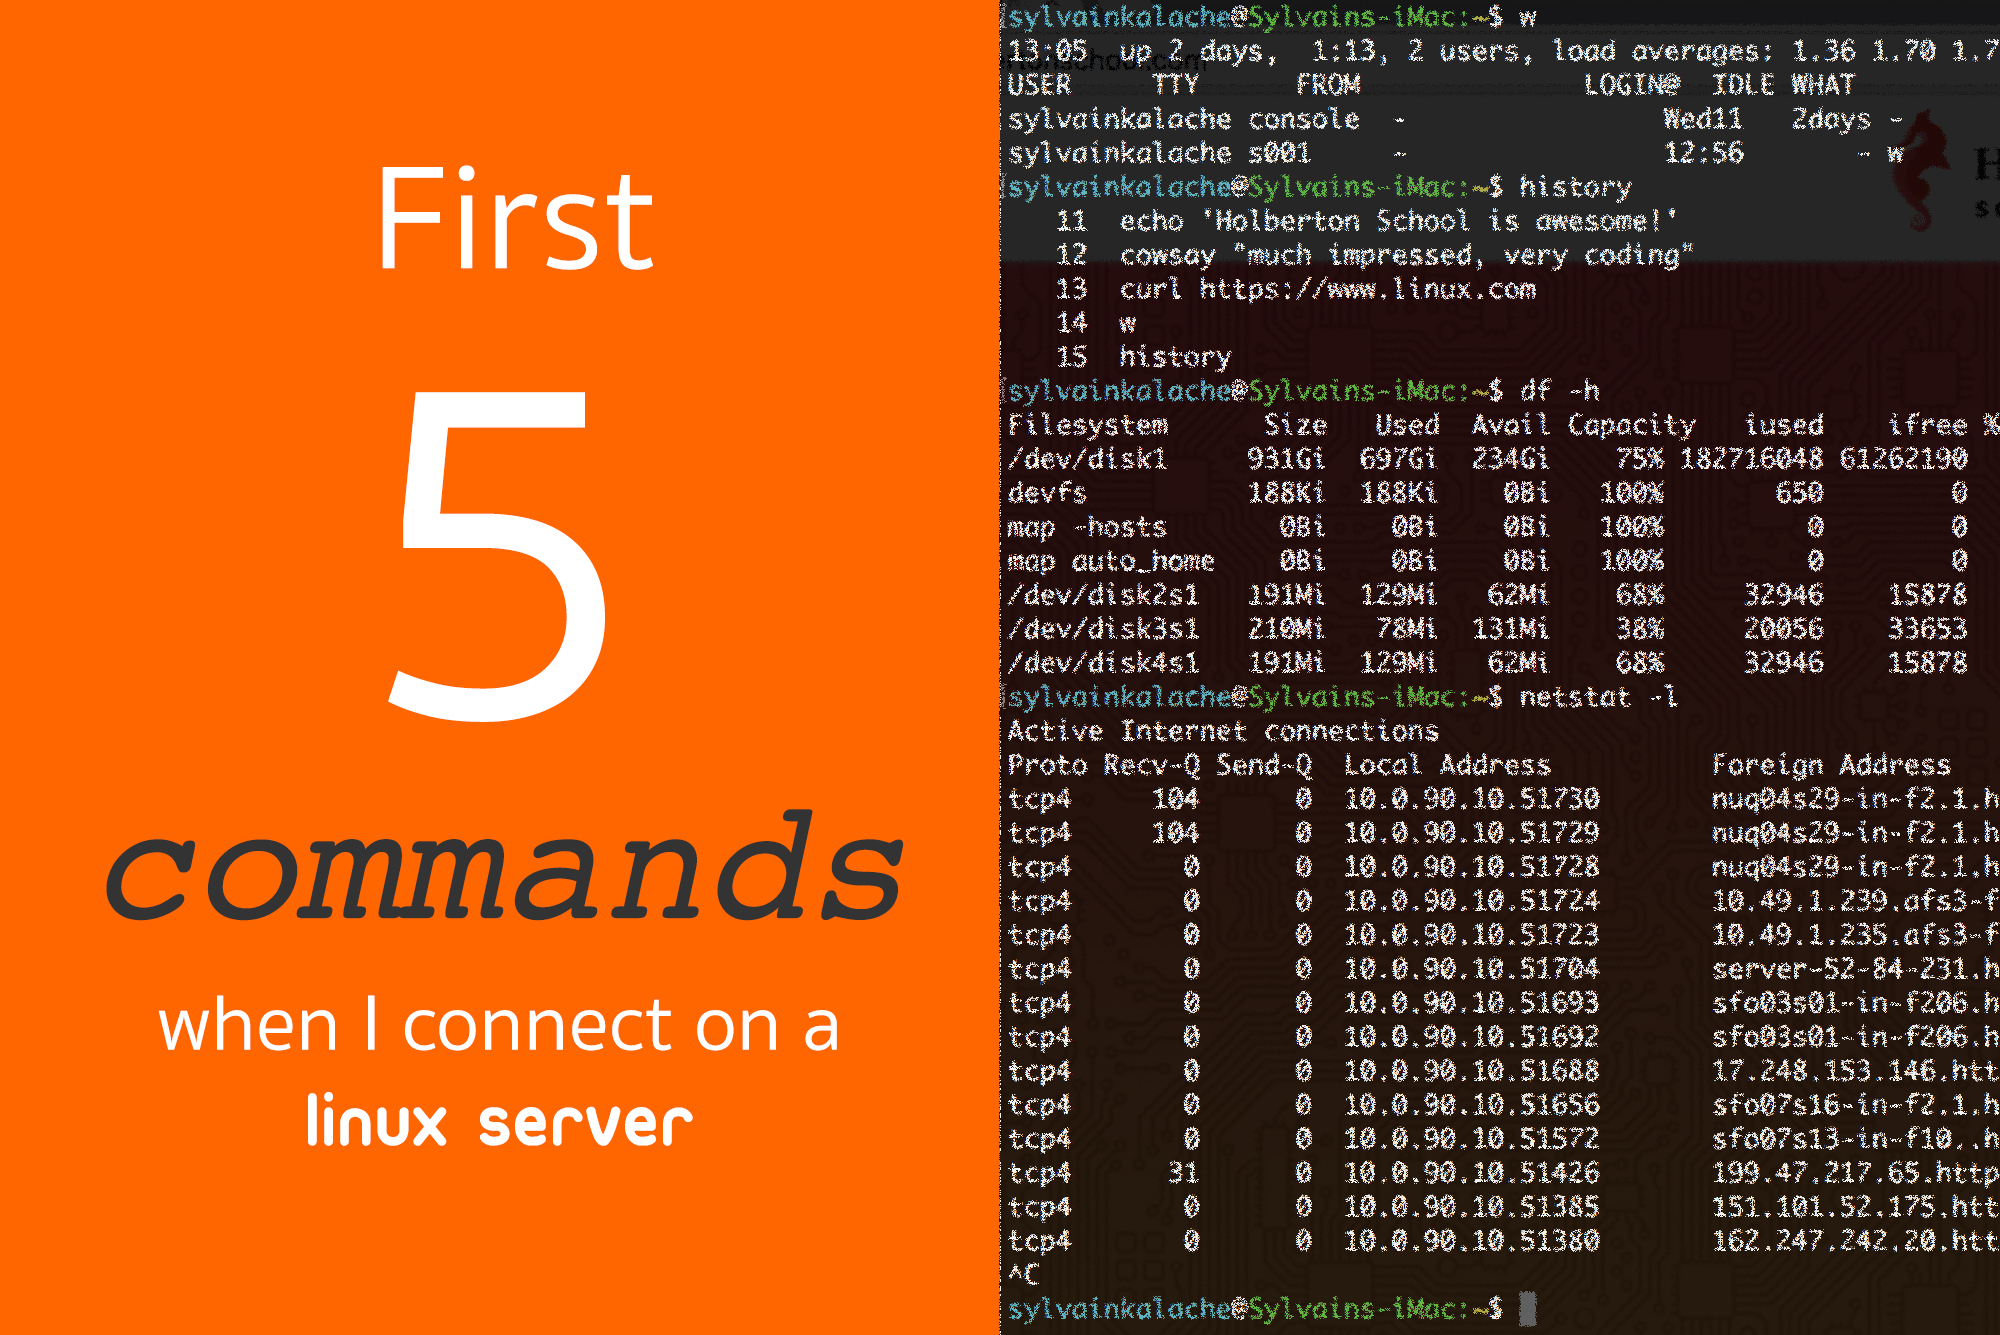 fejl Andrew Halliday Anbefalede First 5 Commands When I Connect on a Linux Server - Linux.com